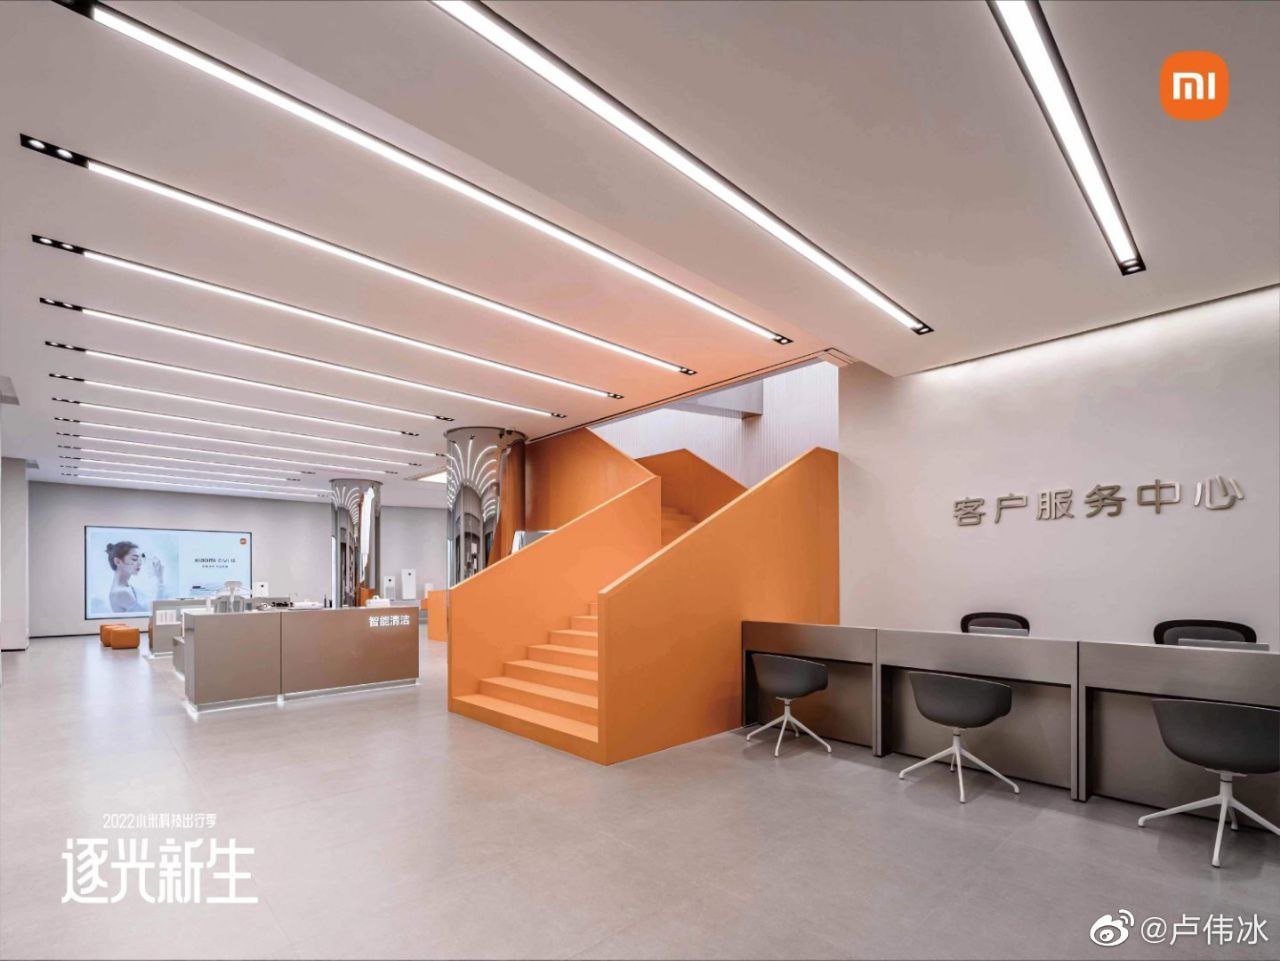 Xiaomi Homes largest flagship Store image 4